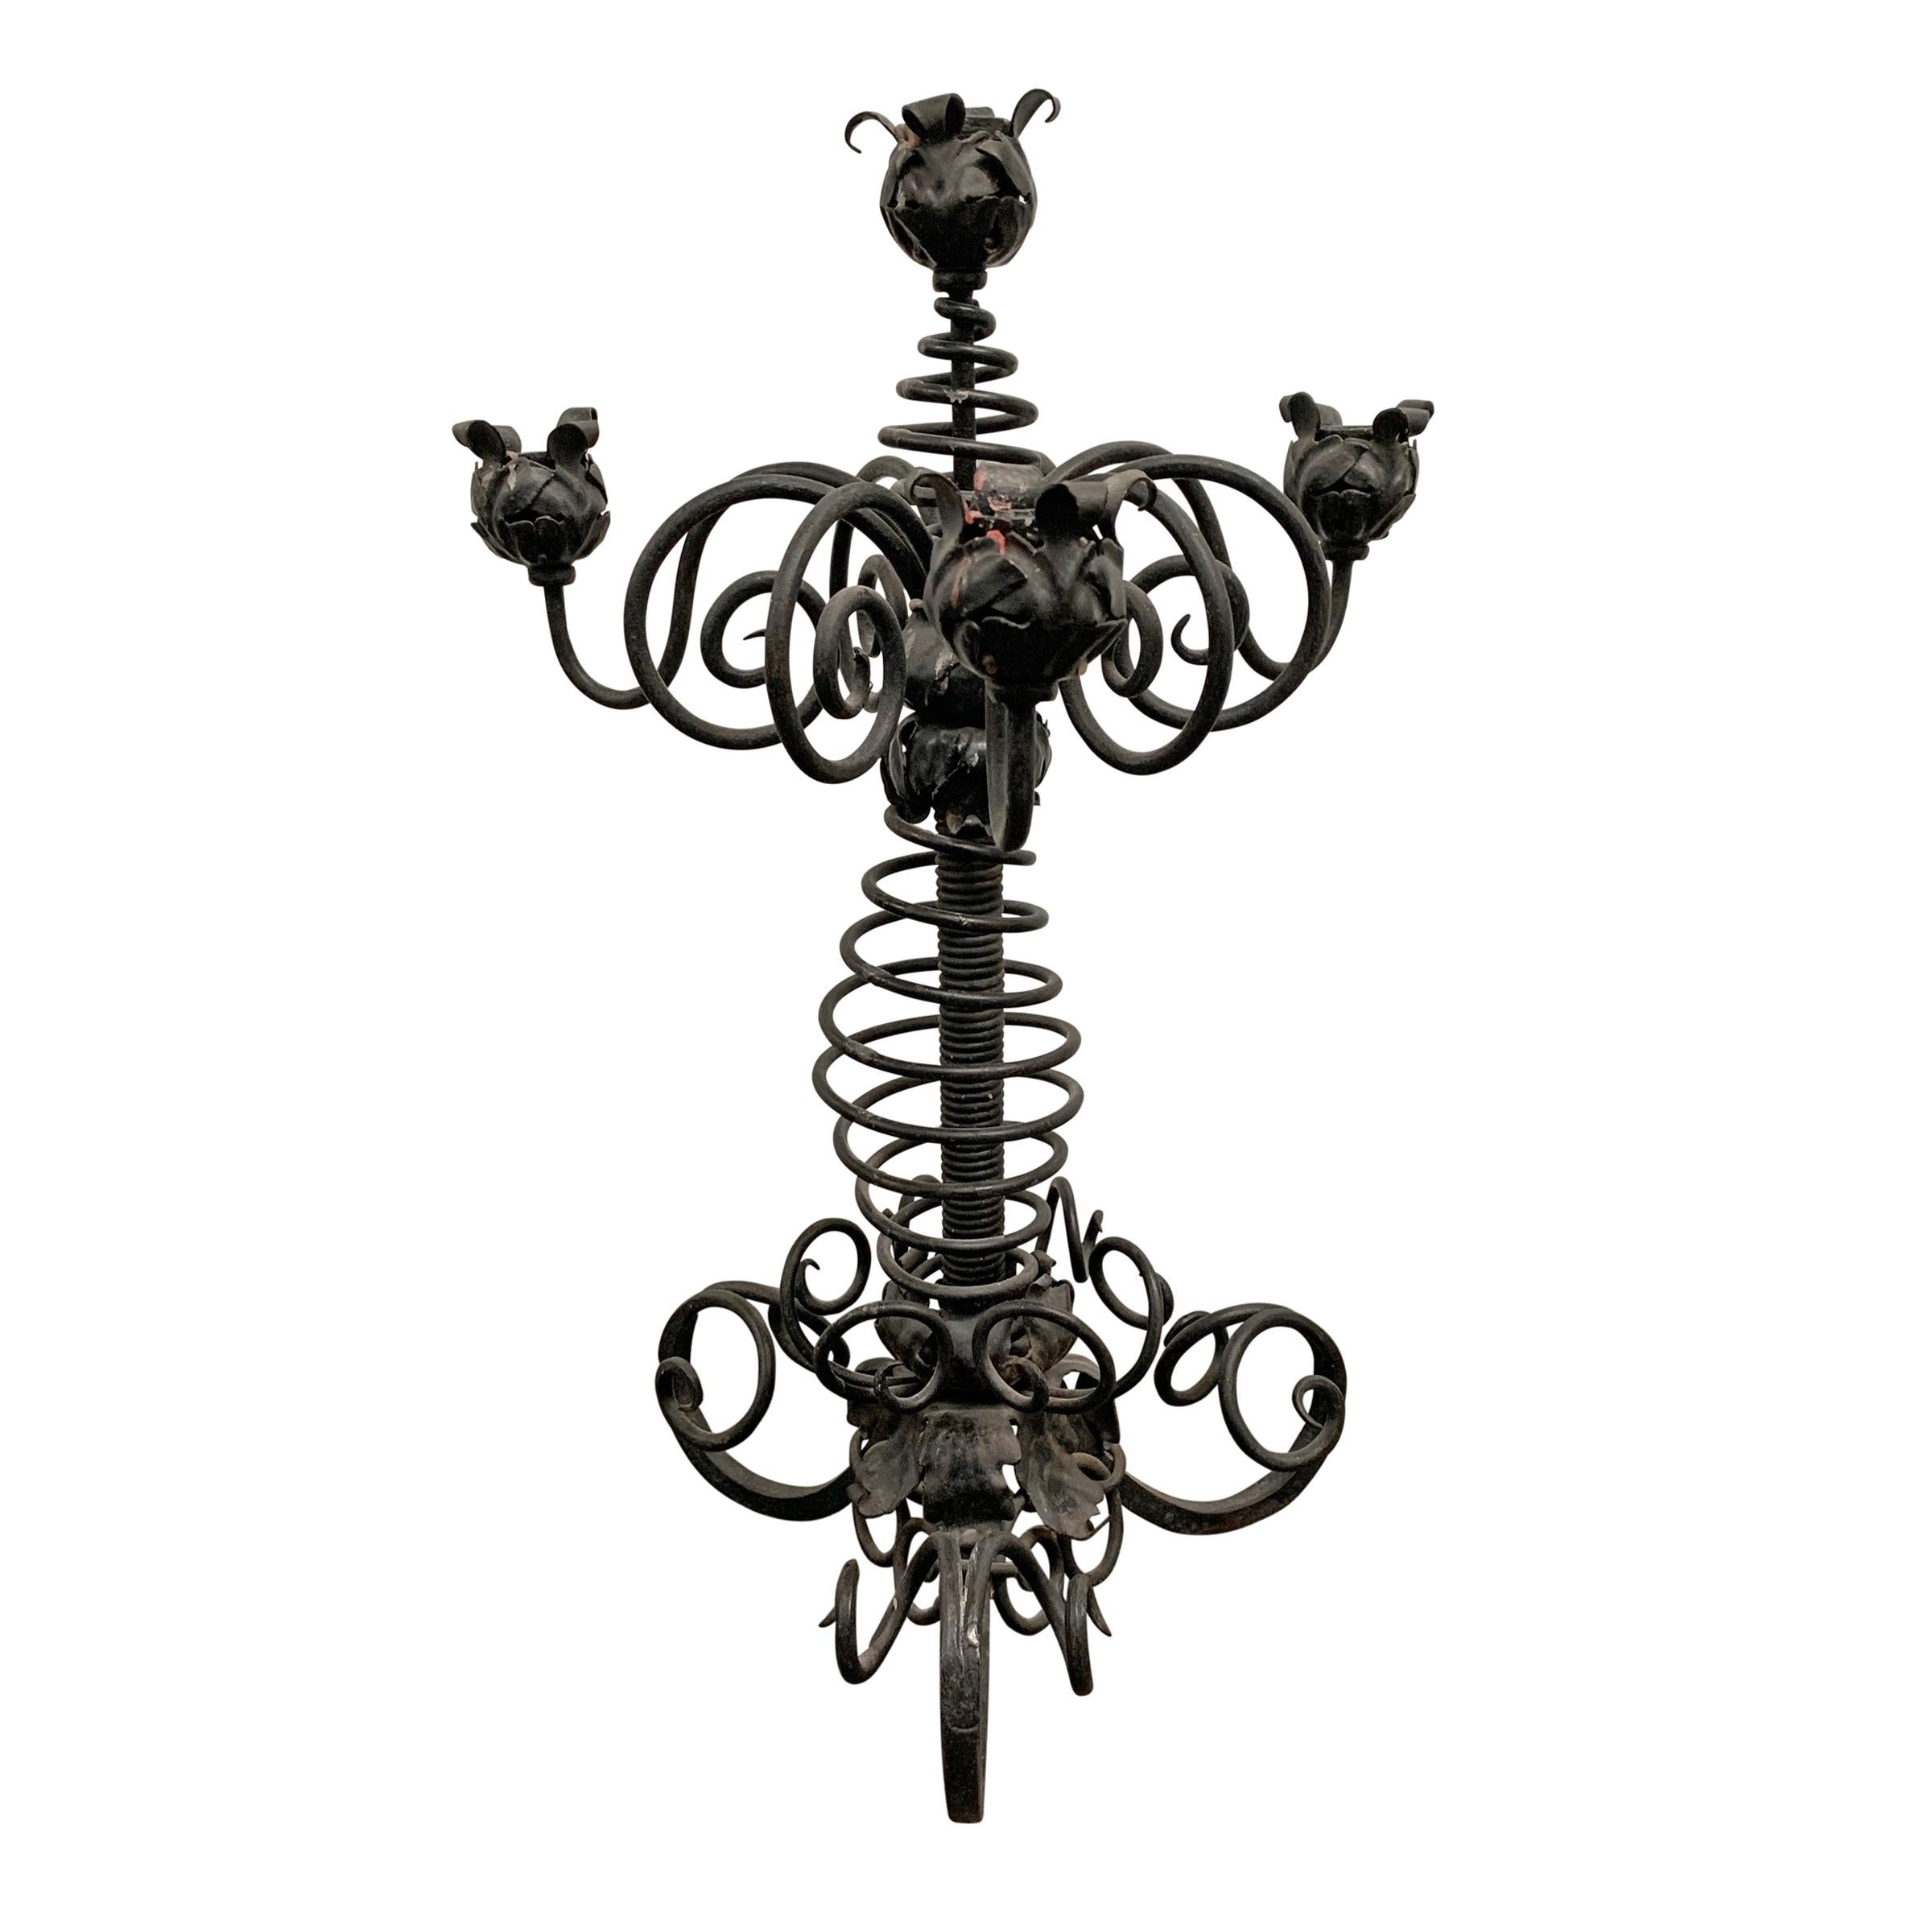 American Ridiculous High-Victorian Wrought Iron Candelabrum